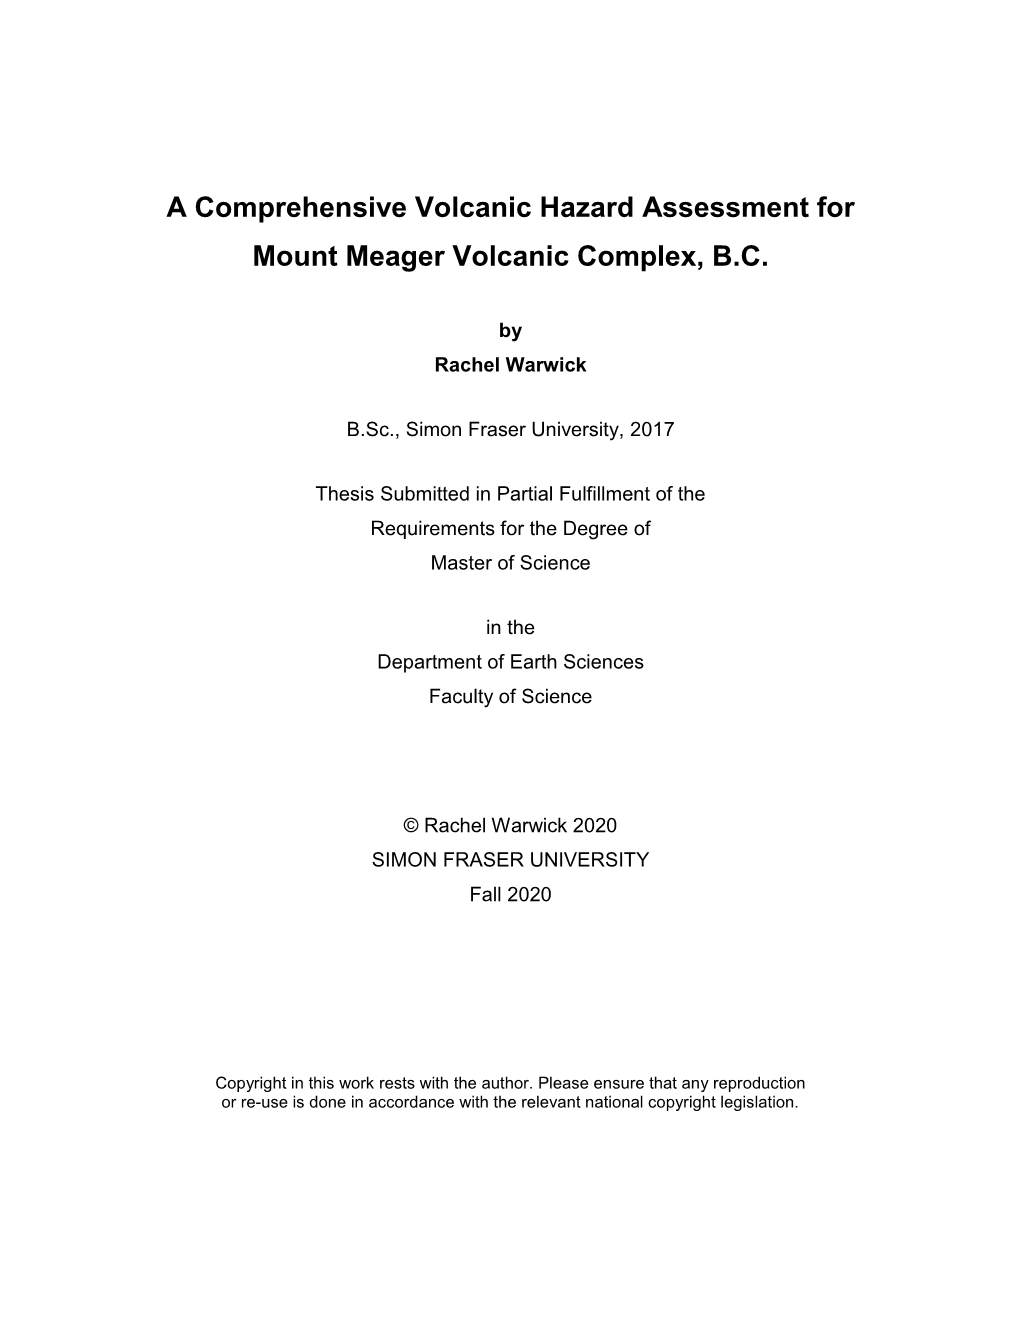 A Comprehensive Volcanic Hazard Assessment for Mount Meager Volcanic Complex, B.C